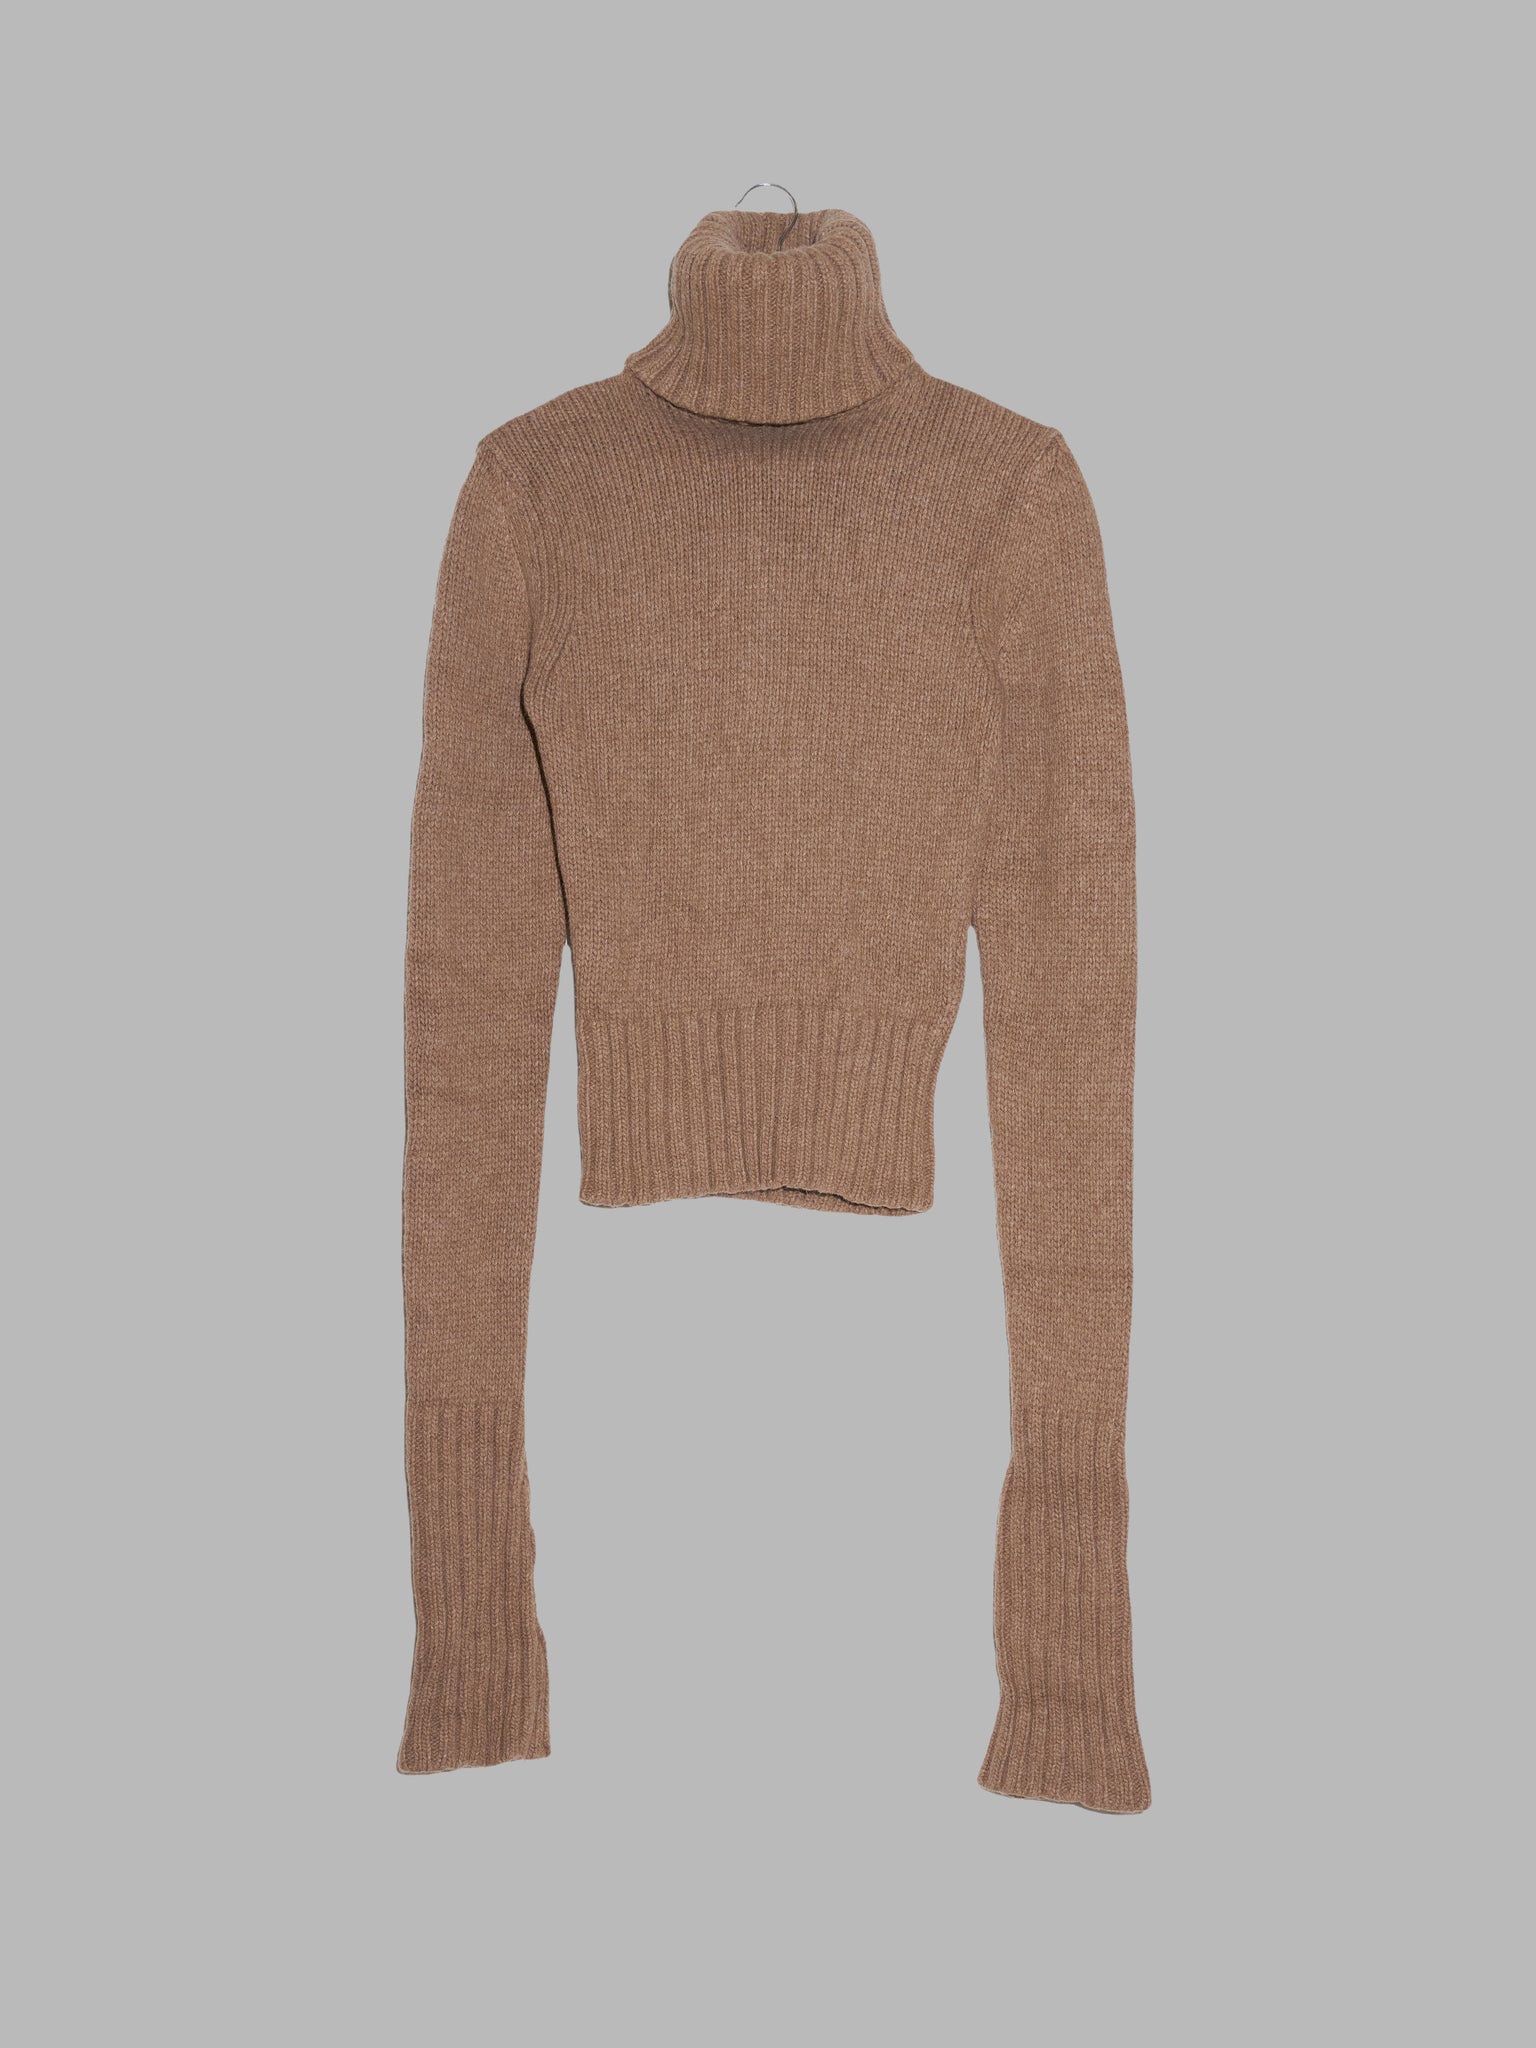 Viktor and Rolf brown wool extra long sleeve turtleneck jumper - size 40